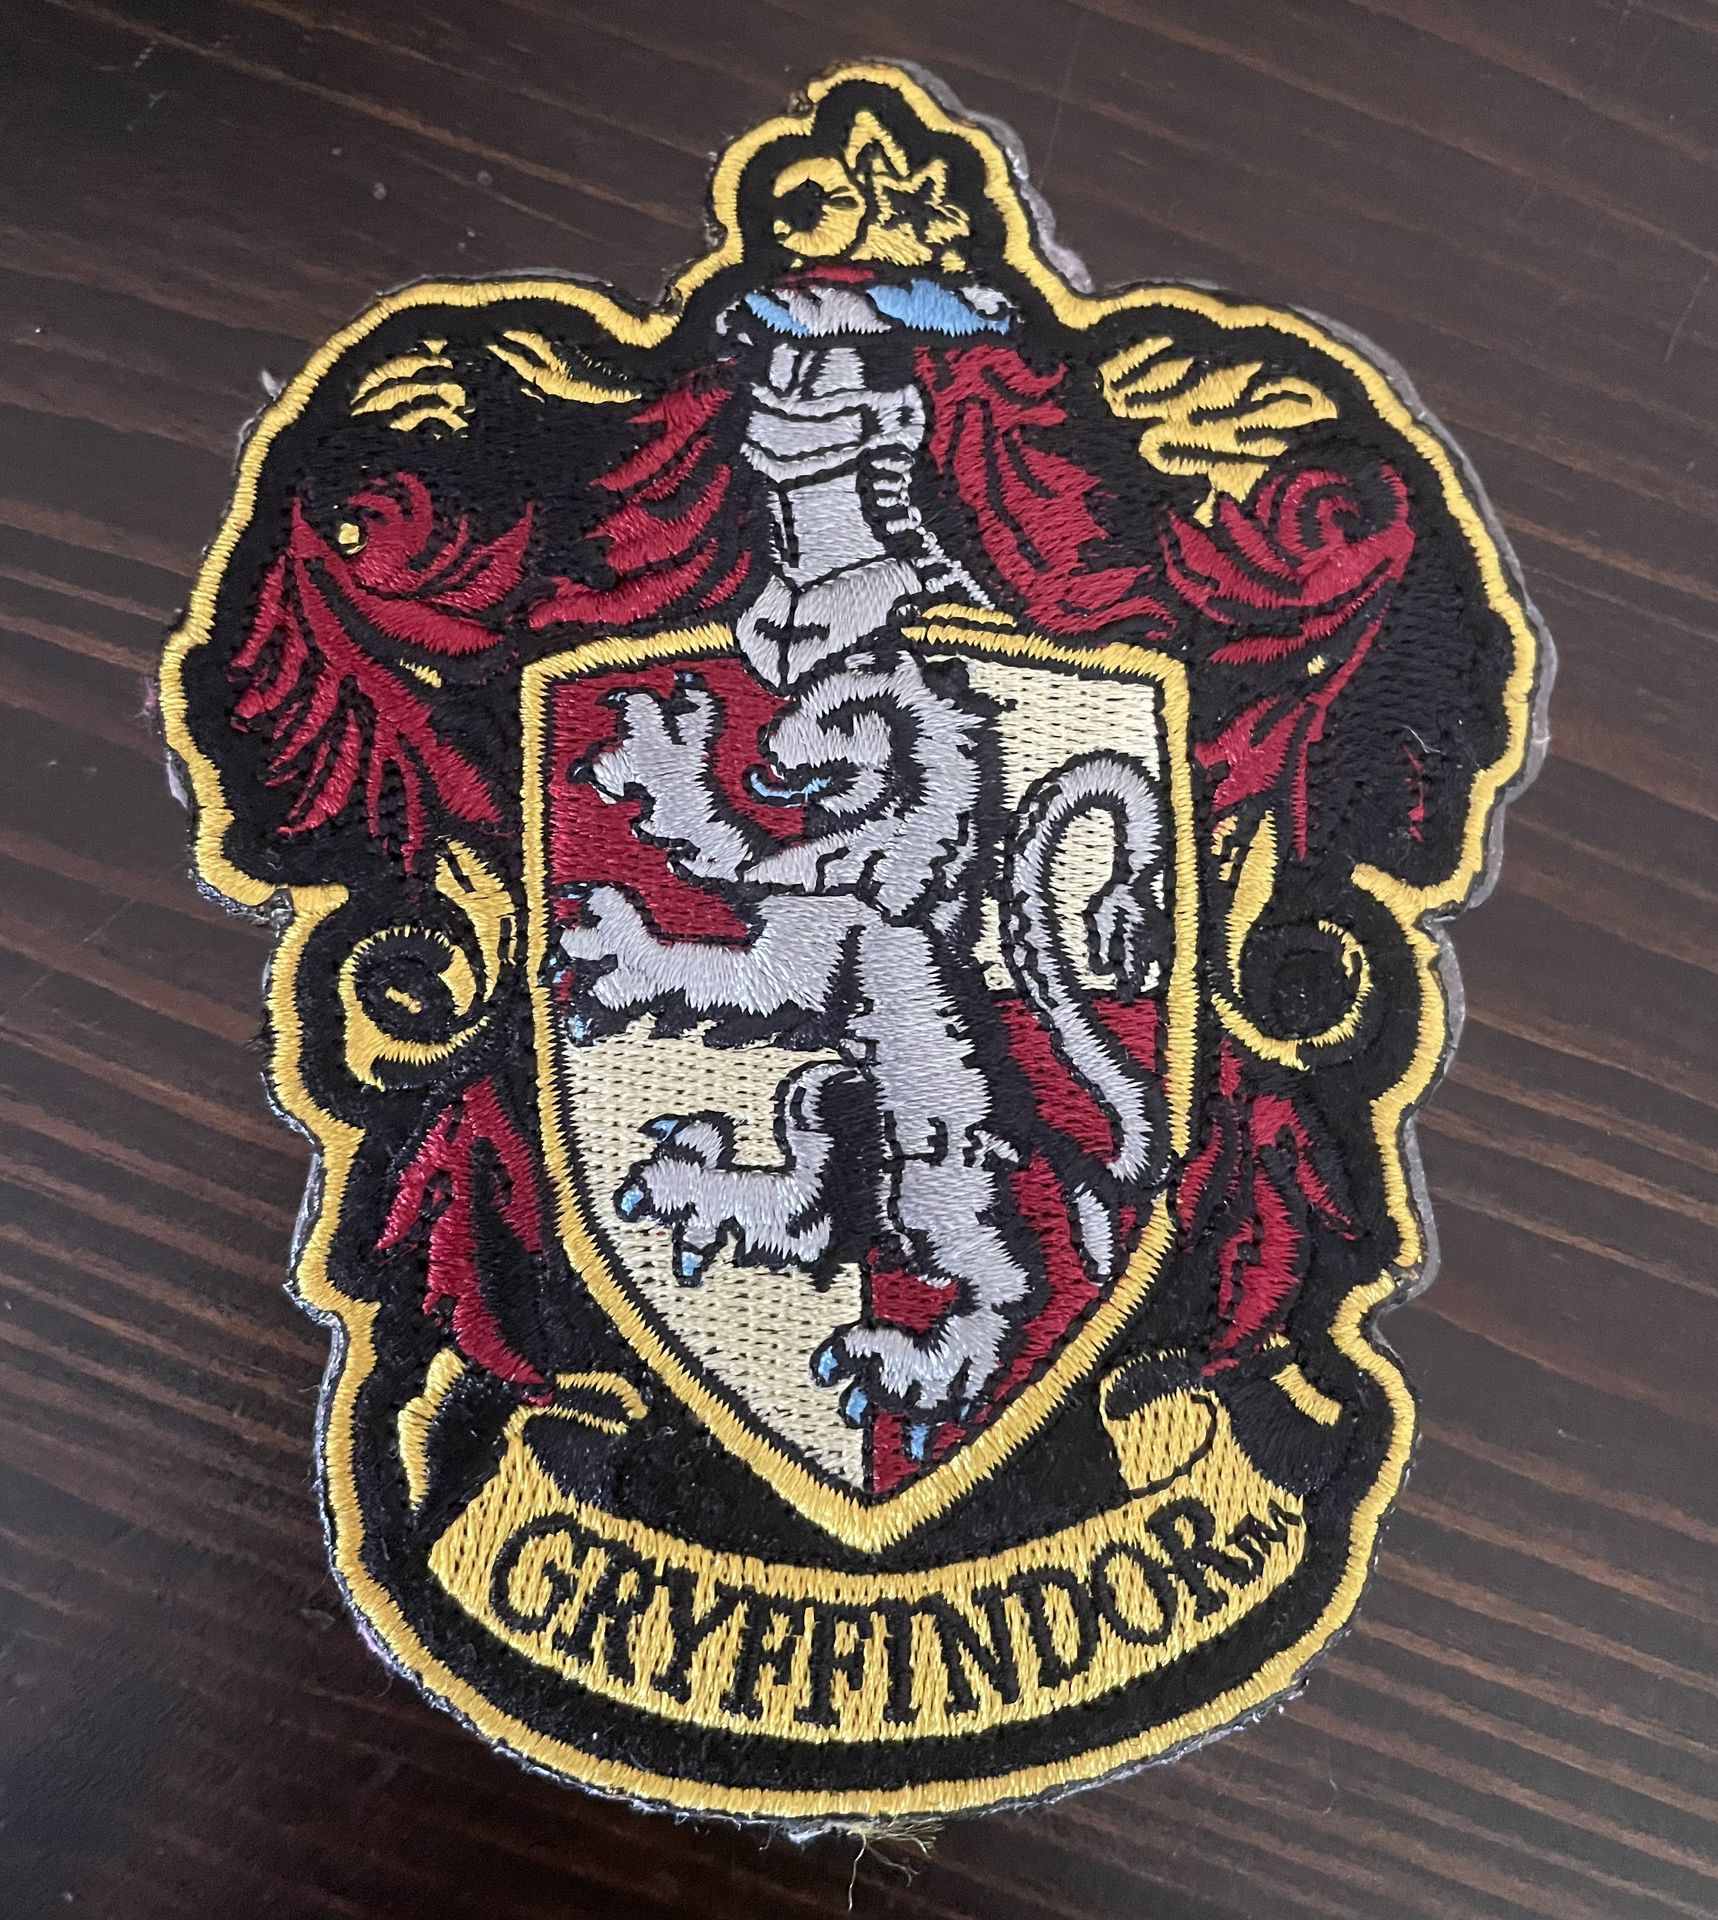  Harry Potter Gryffindor Patch, New Playing Cards, Keychain, Empty Box with Card.